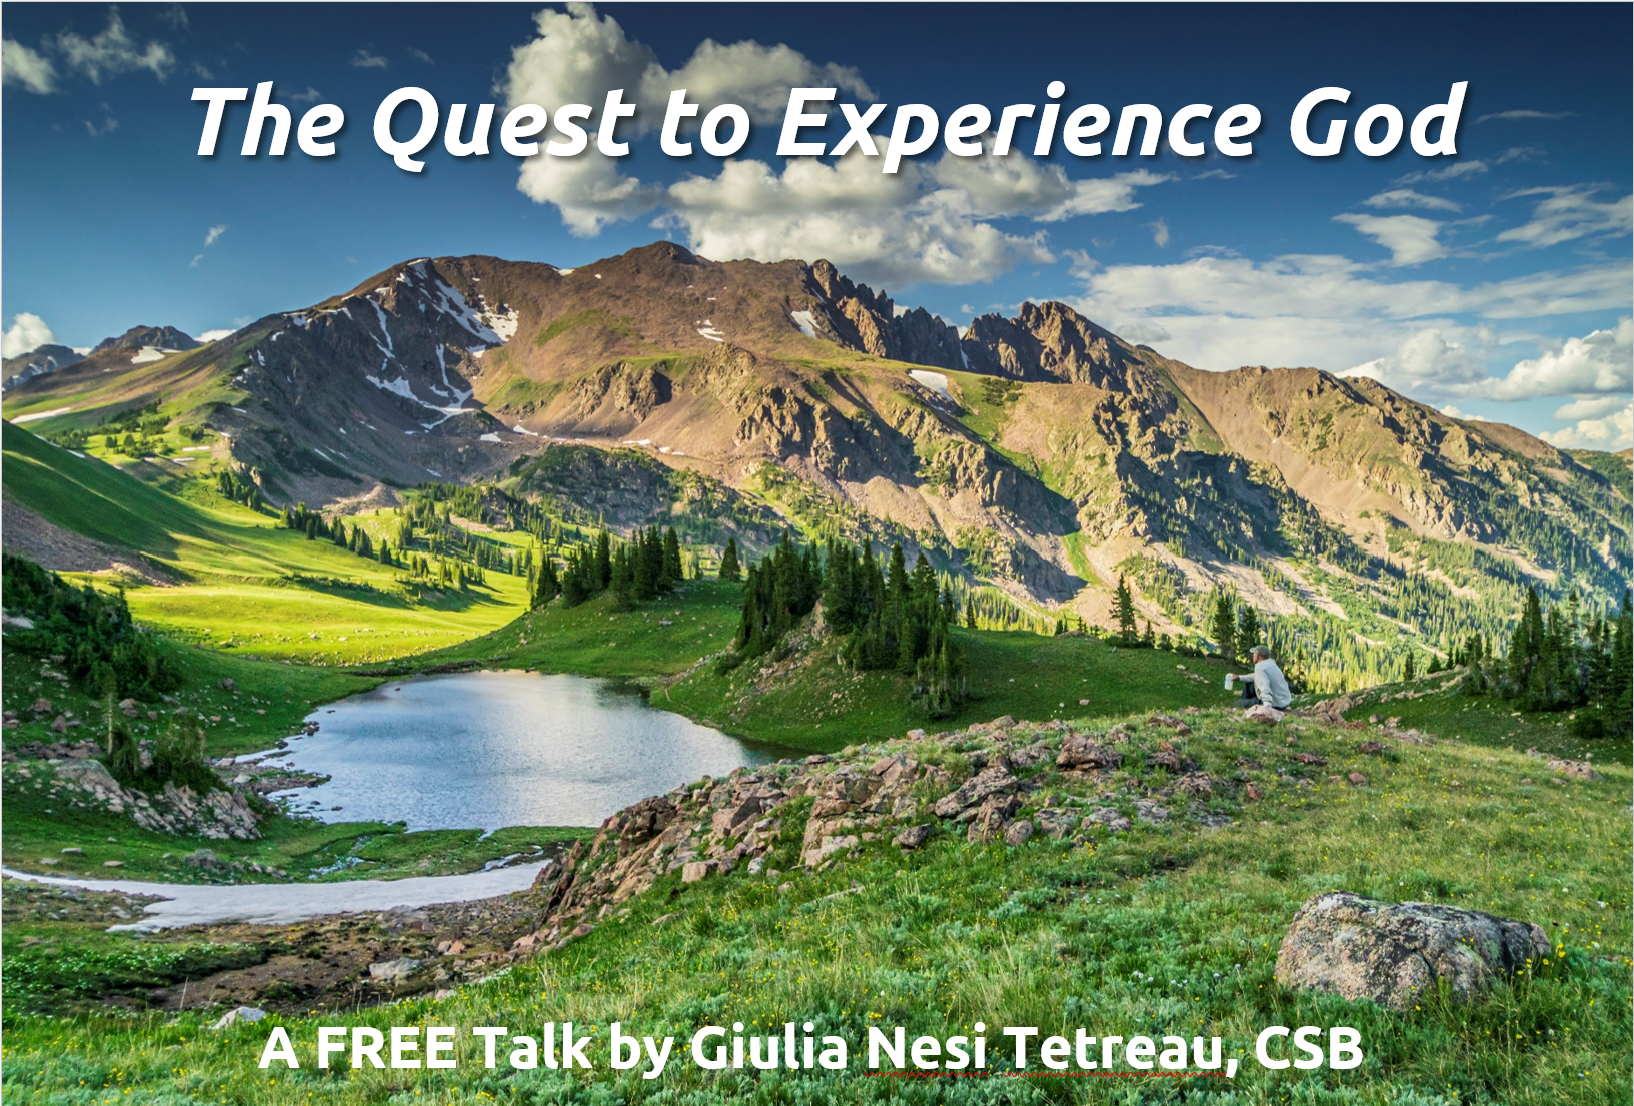 The Quest to Experience God